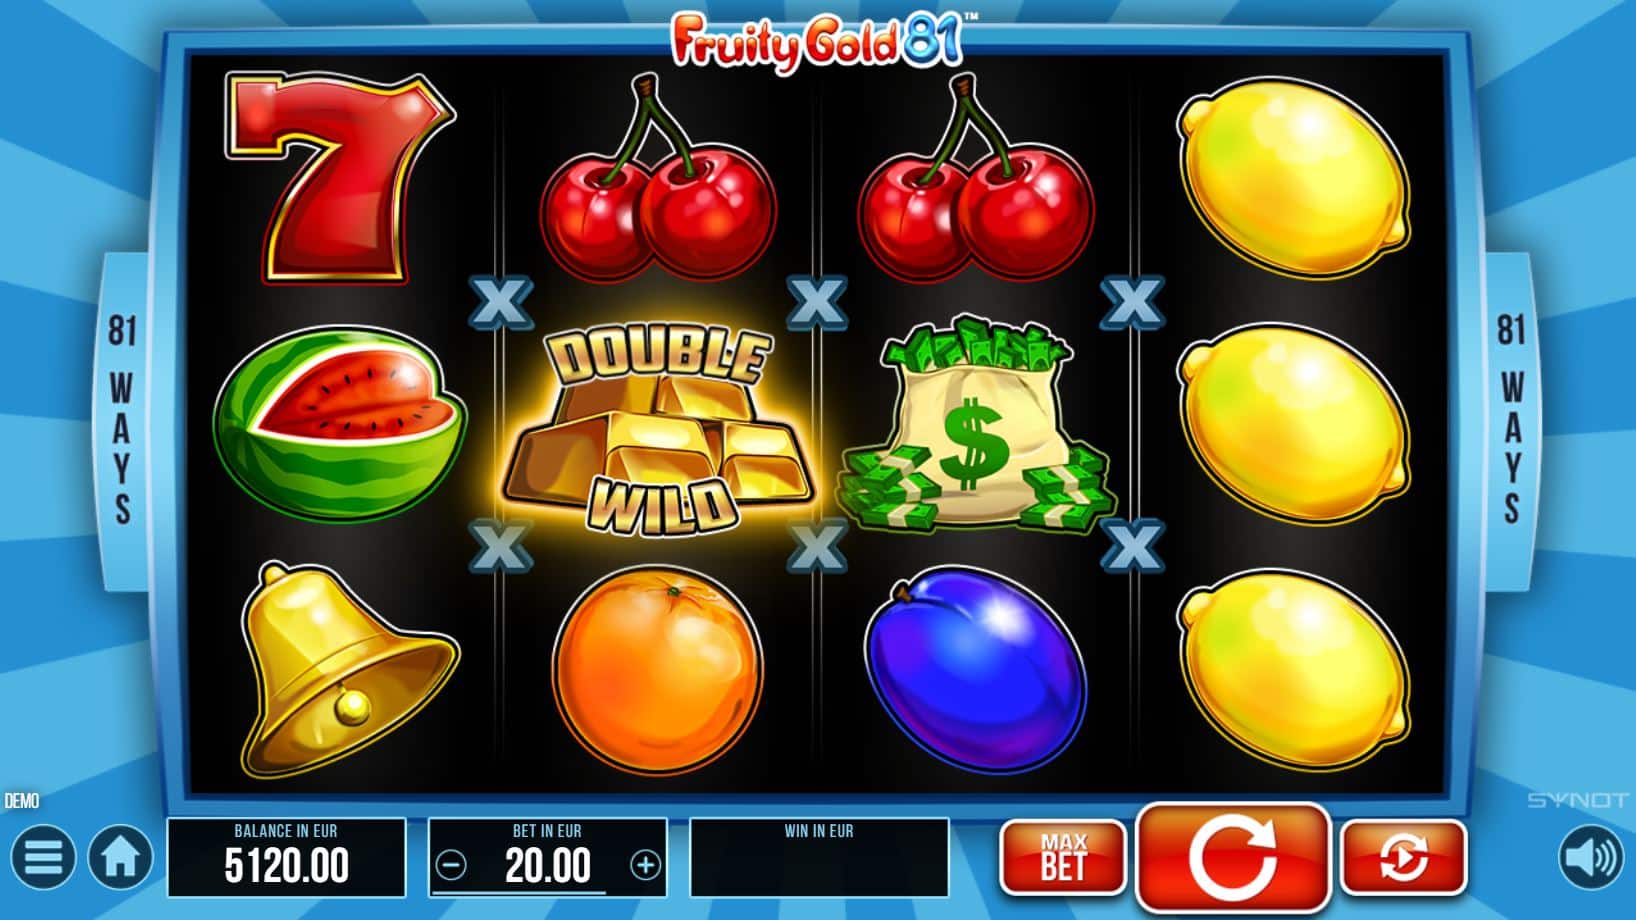 Hra Fruity Gold 81 od SYNOT Games